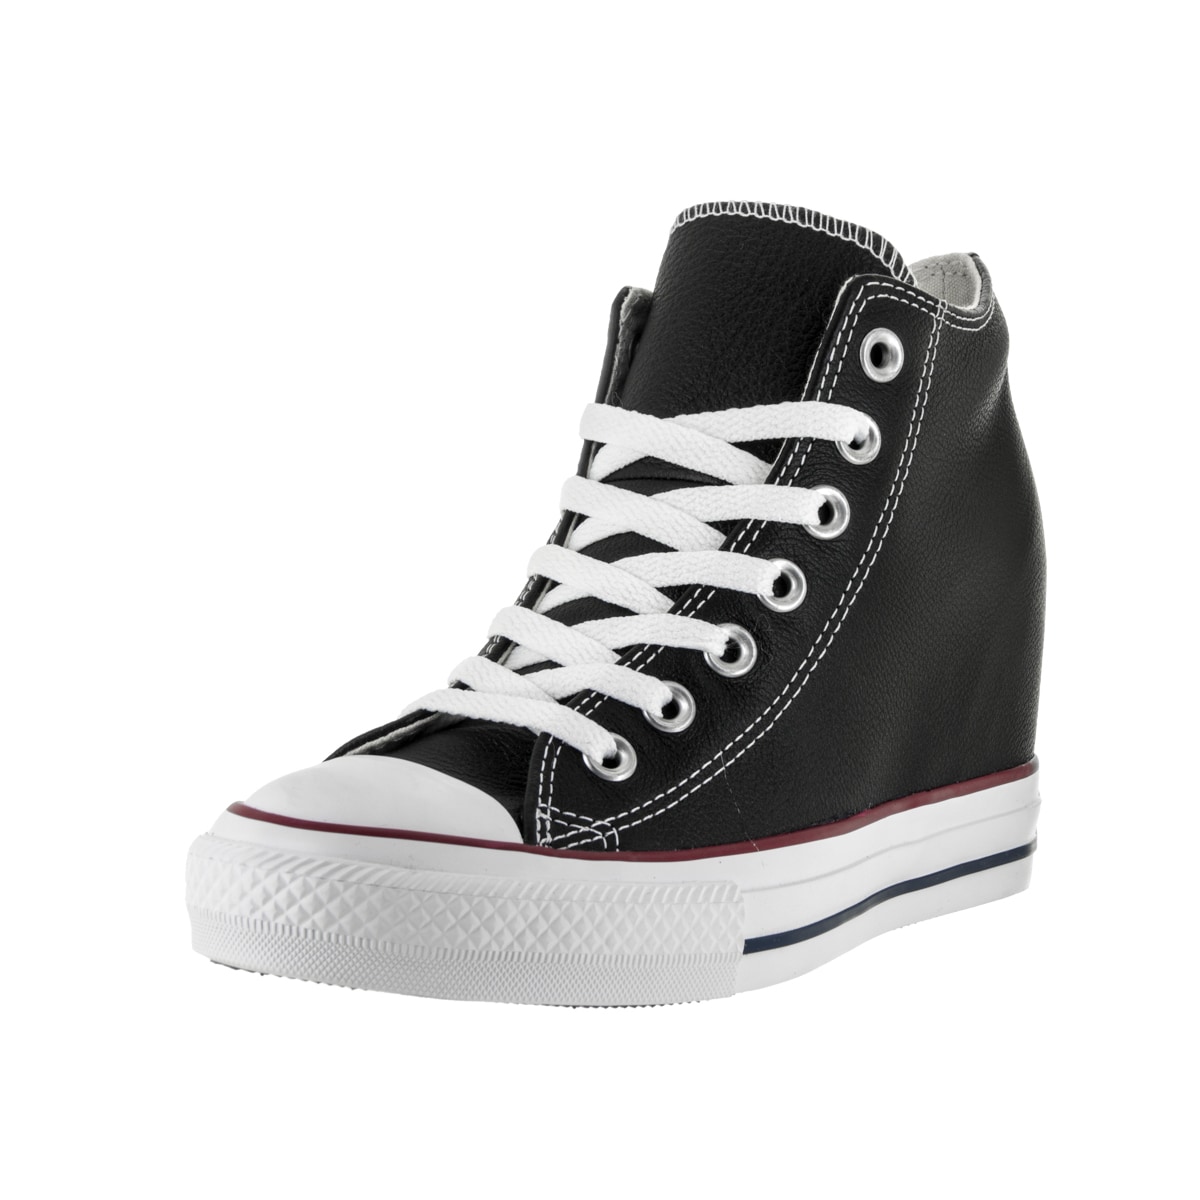 converse chuck taylor lux mid leather womens trainers